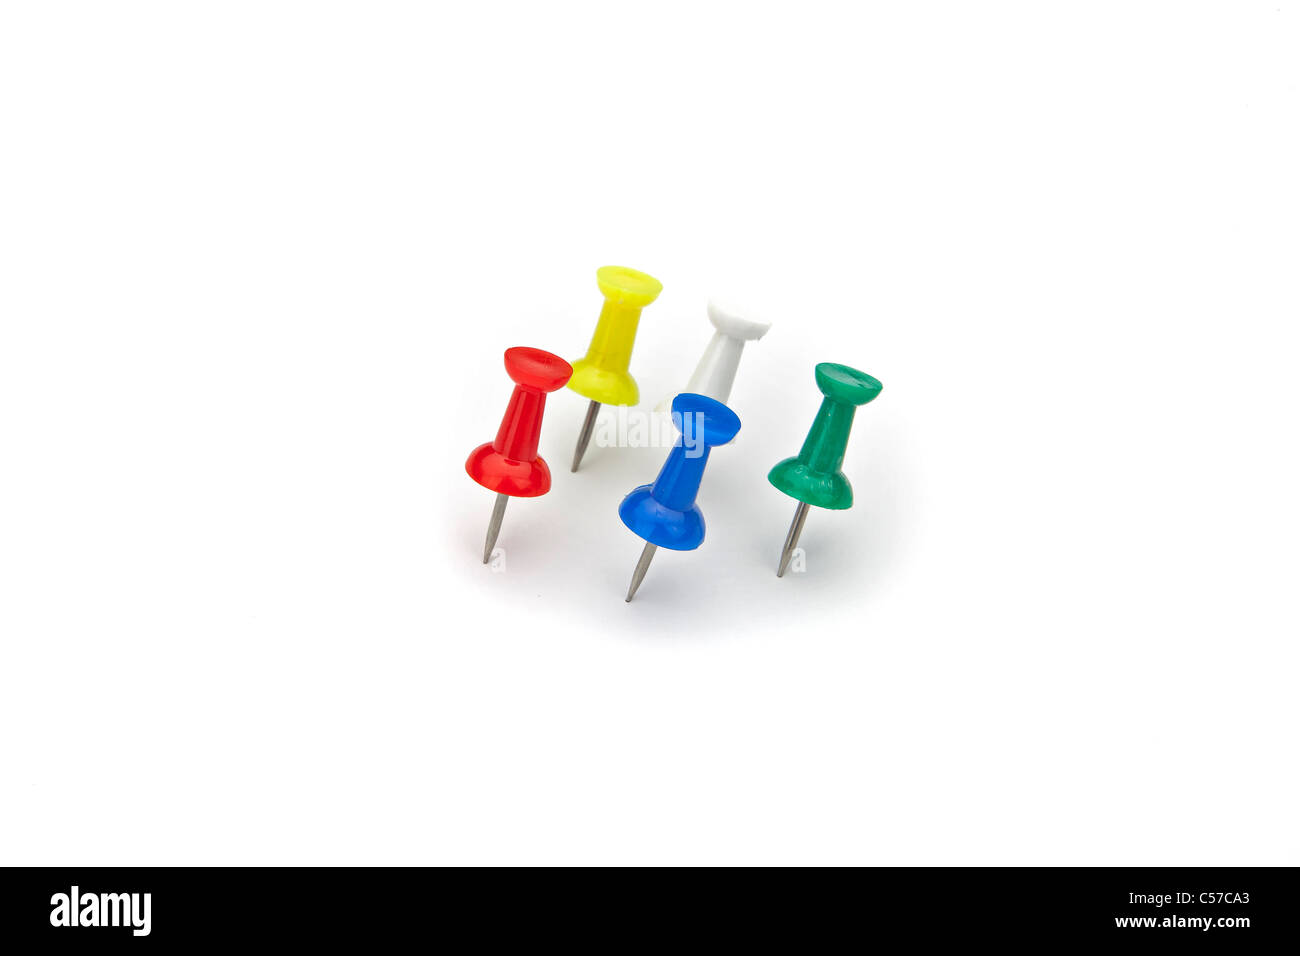 for five thumbtacks of various colors on white background Stock Photo